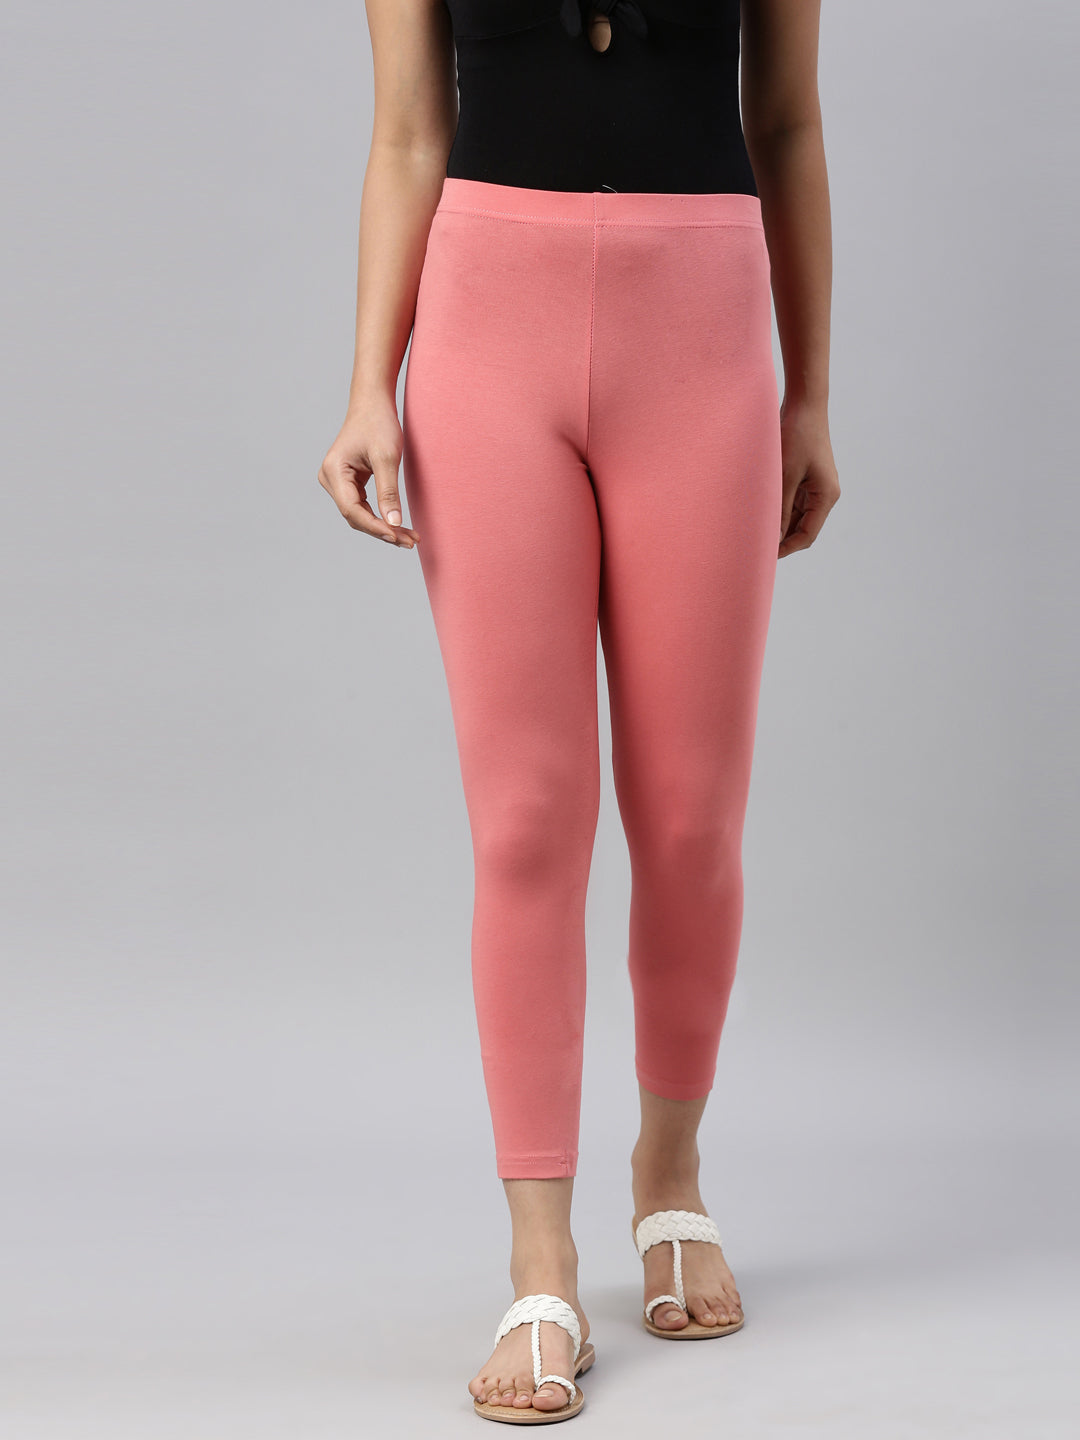 Women Solid Dusty Pink Cotton Cropped Leggings